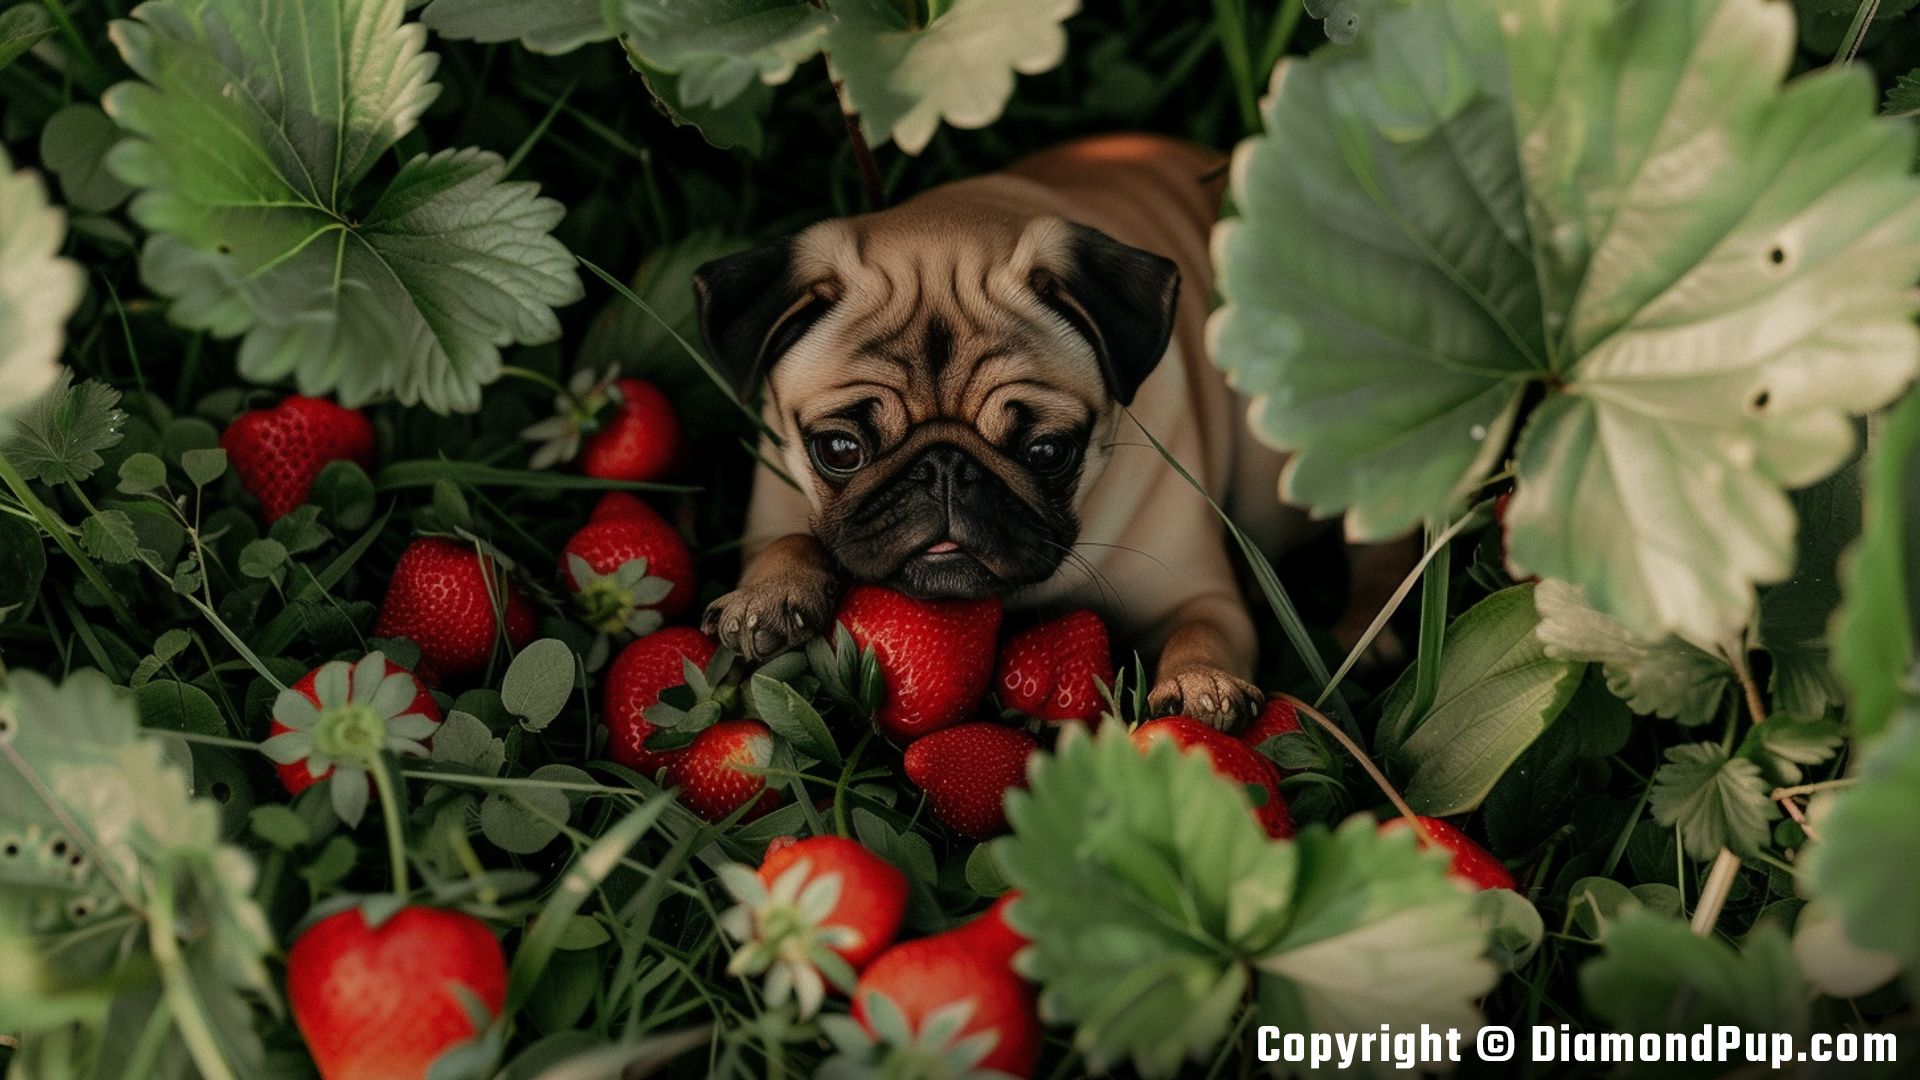 Photo of a Cute Pug Snacking on Strawberries